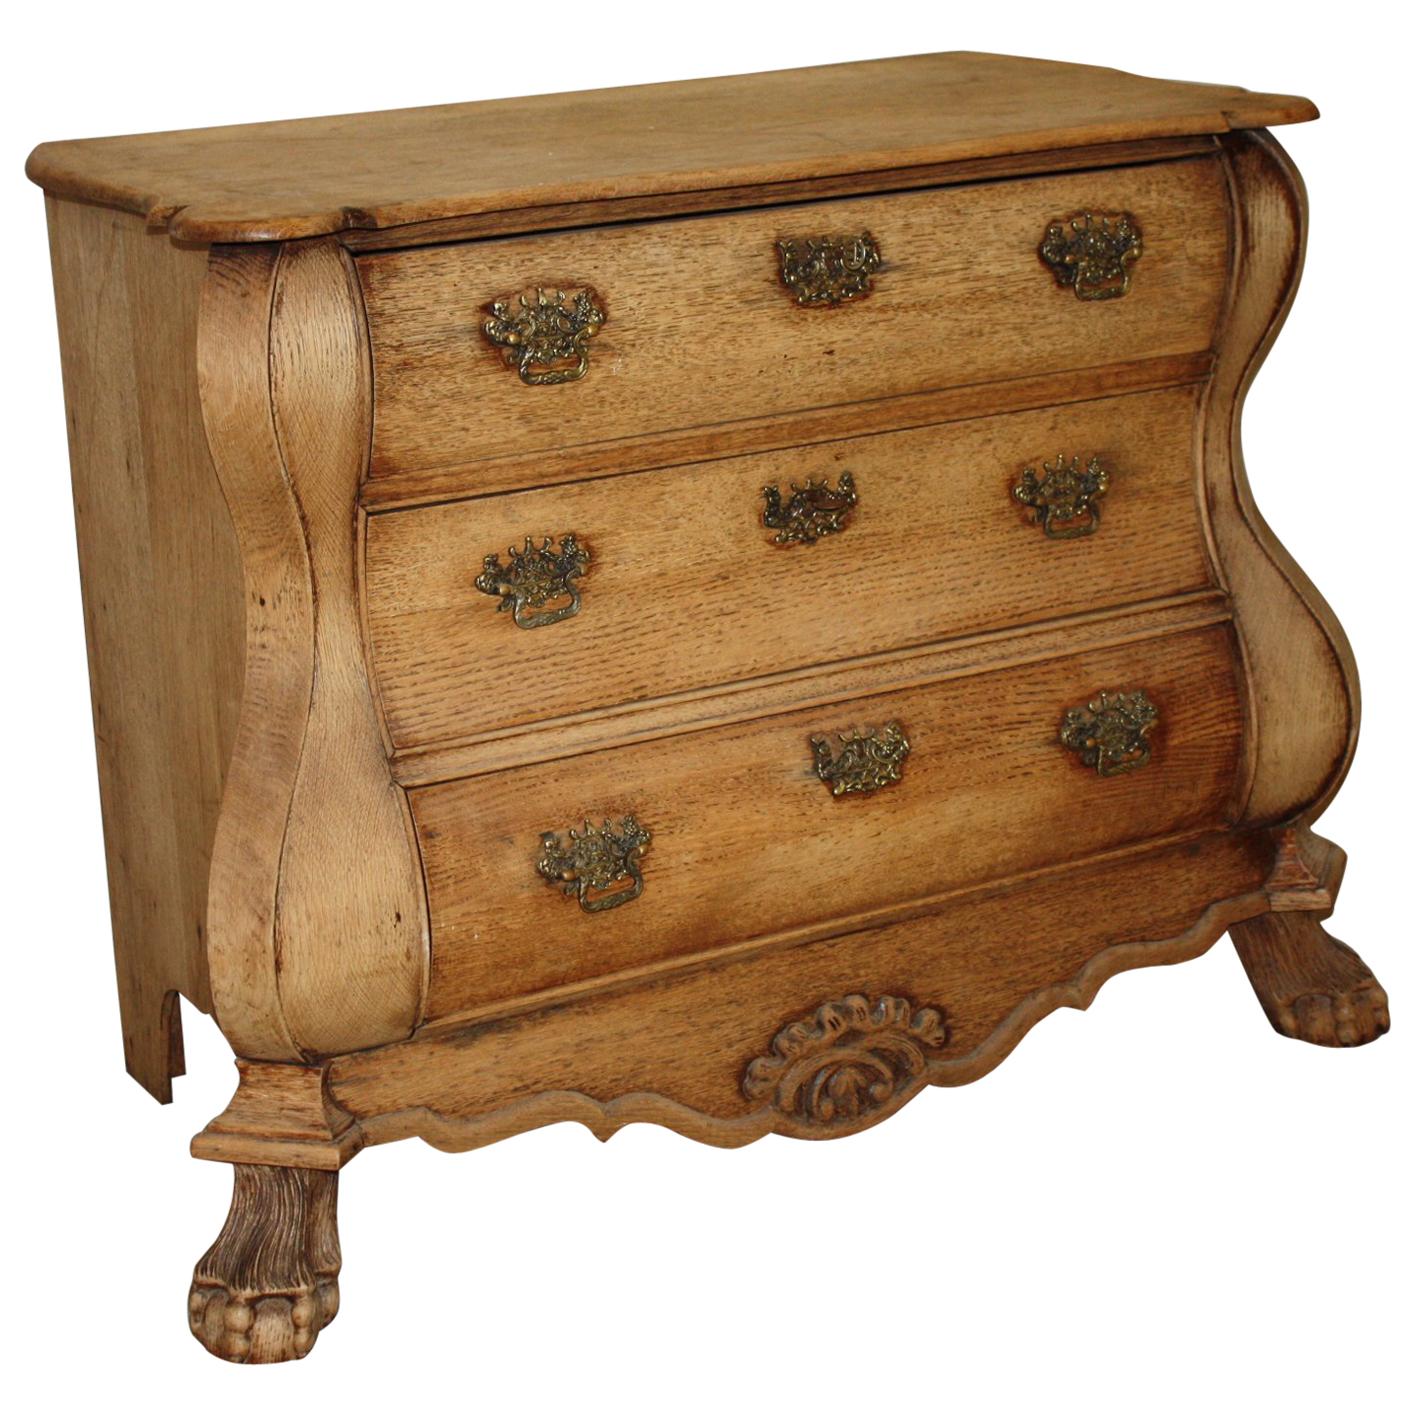 Early 20th Century Dutch Bombay Chest